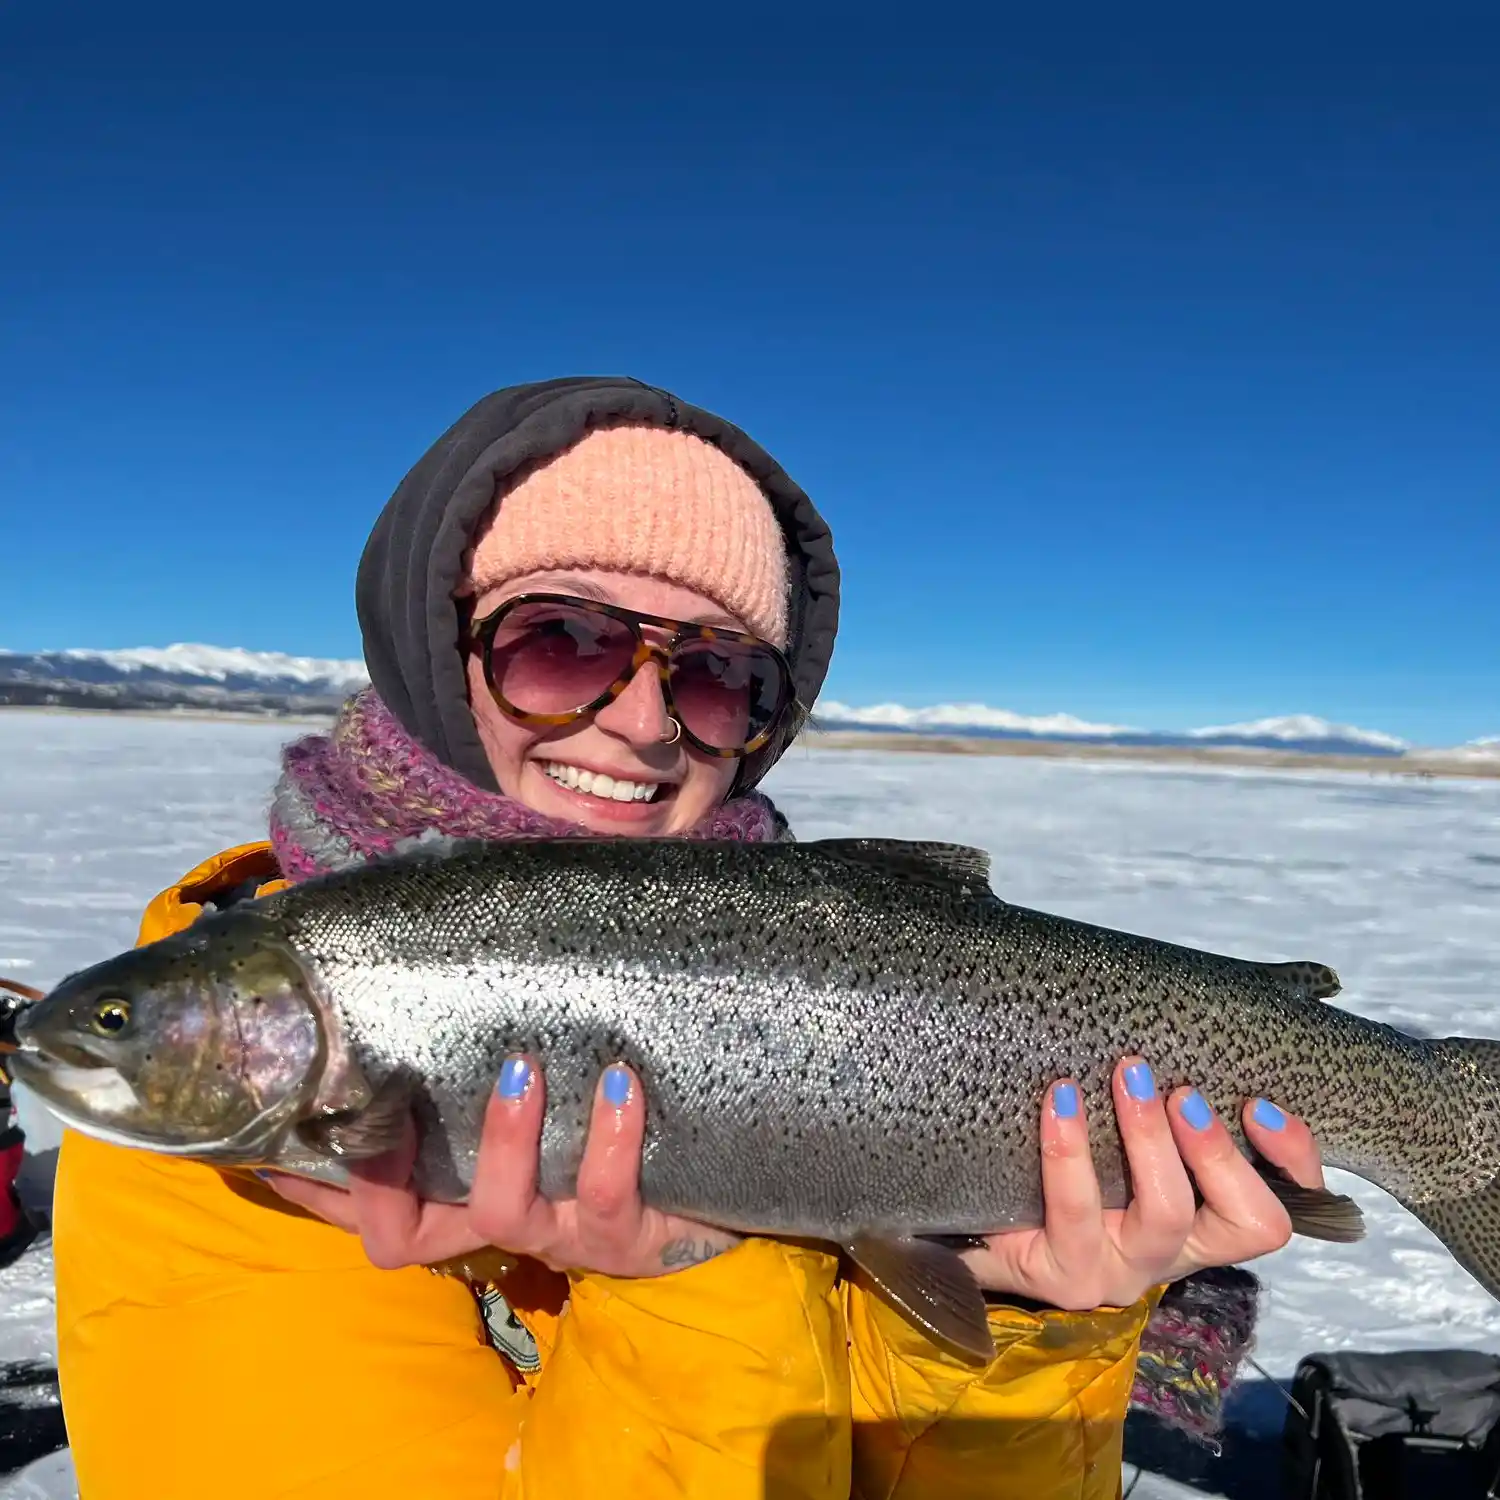 Fishing reports, best baits and forecast for fishing in Antero Reservoir